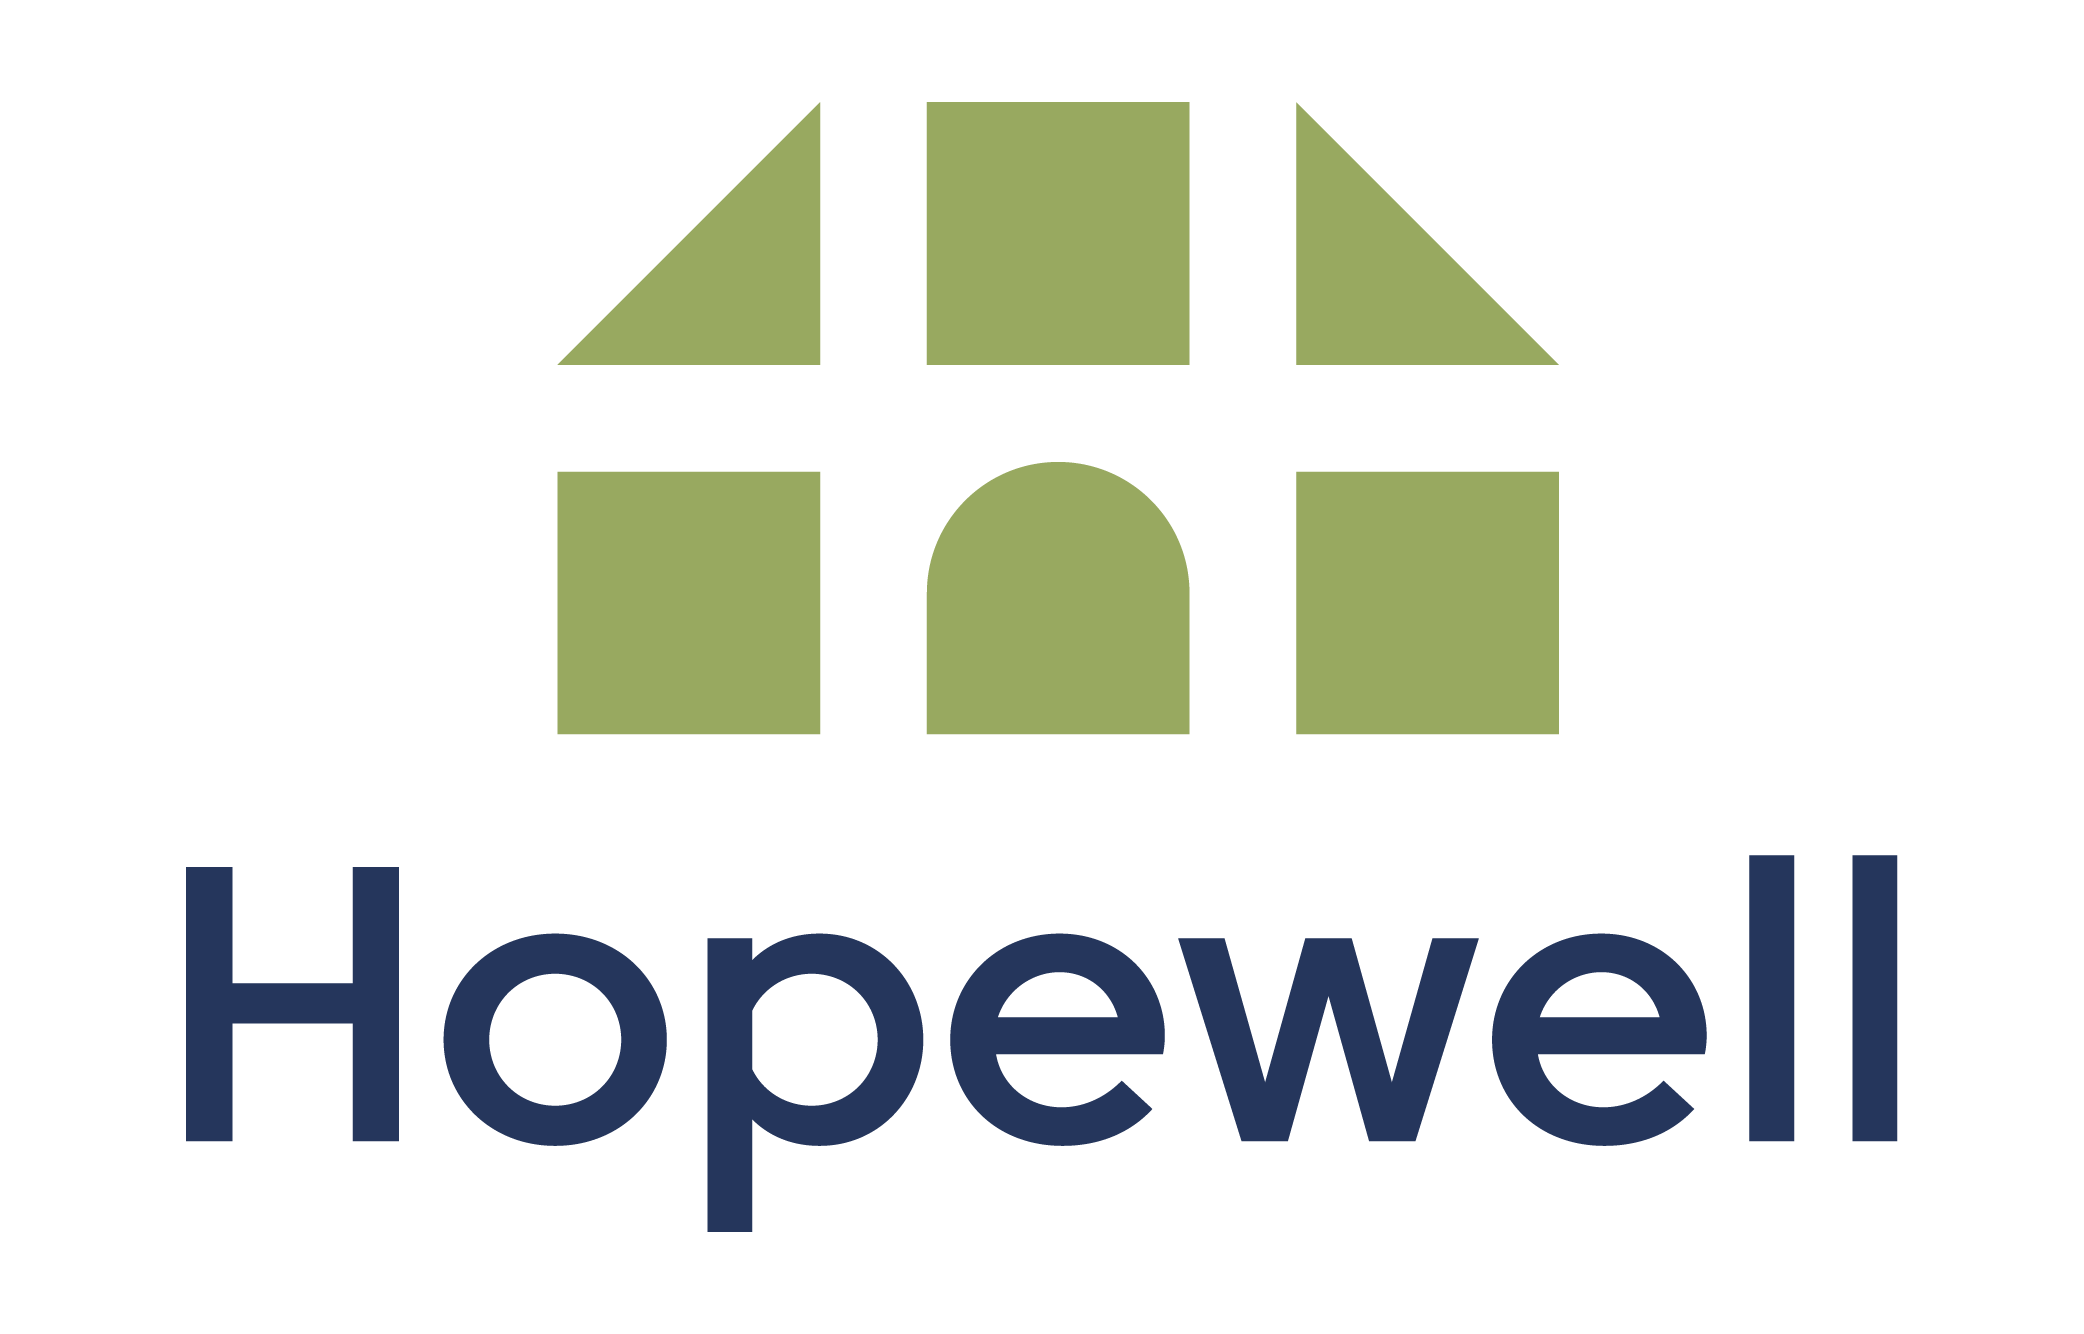 Hopewell logo in green and blue